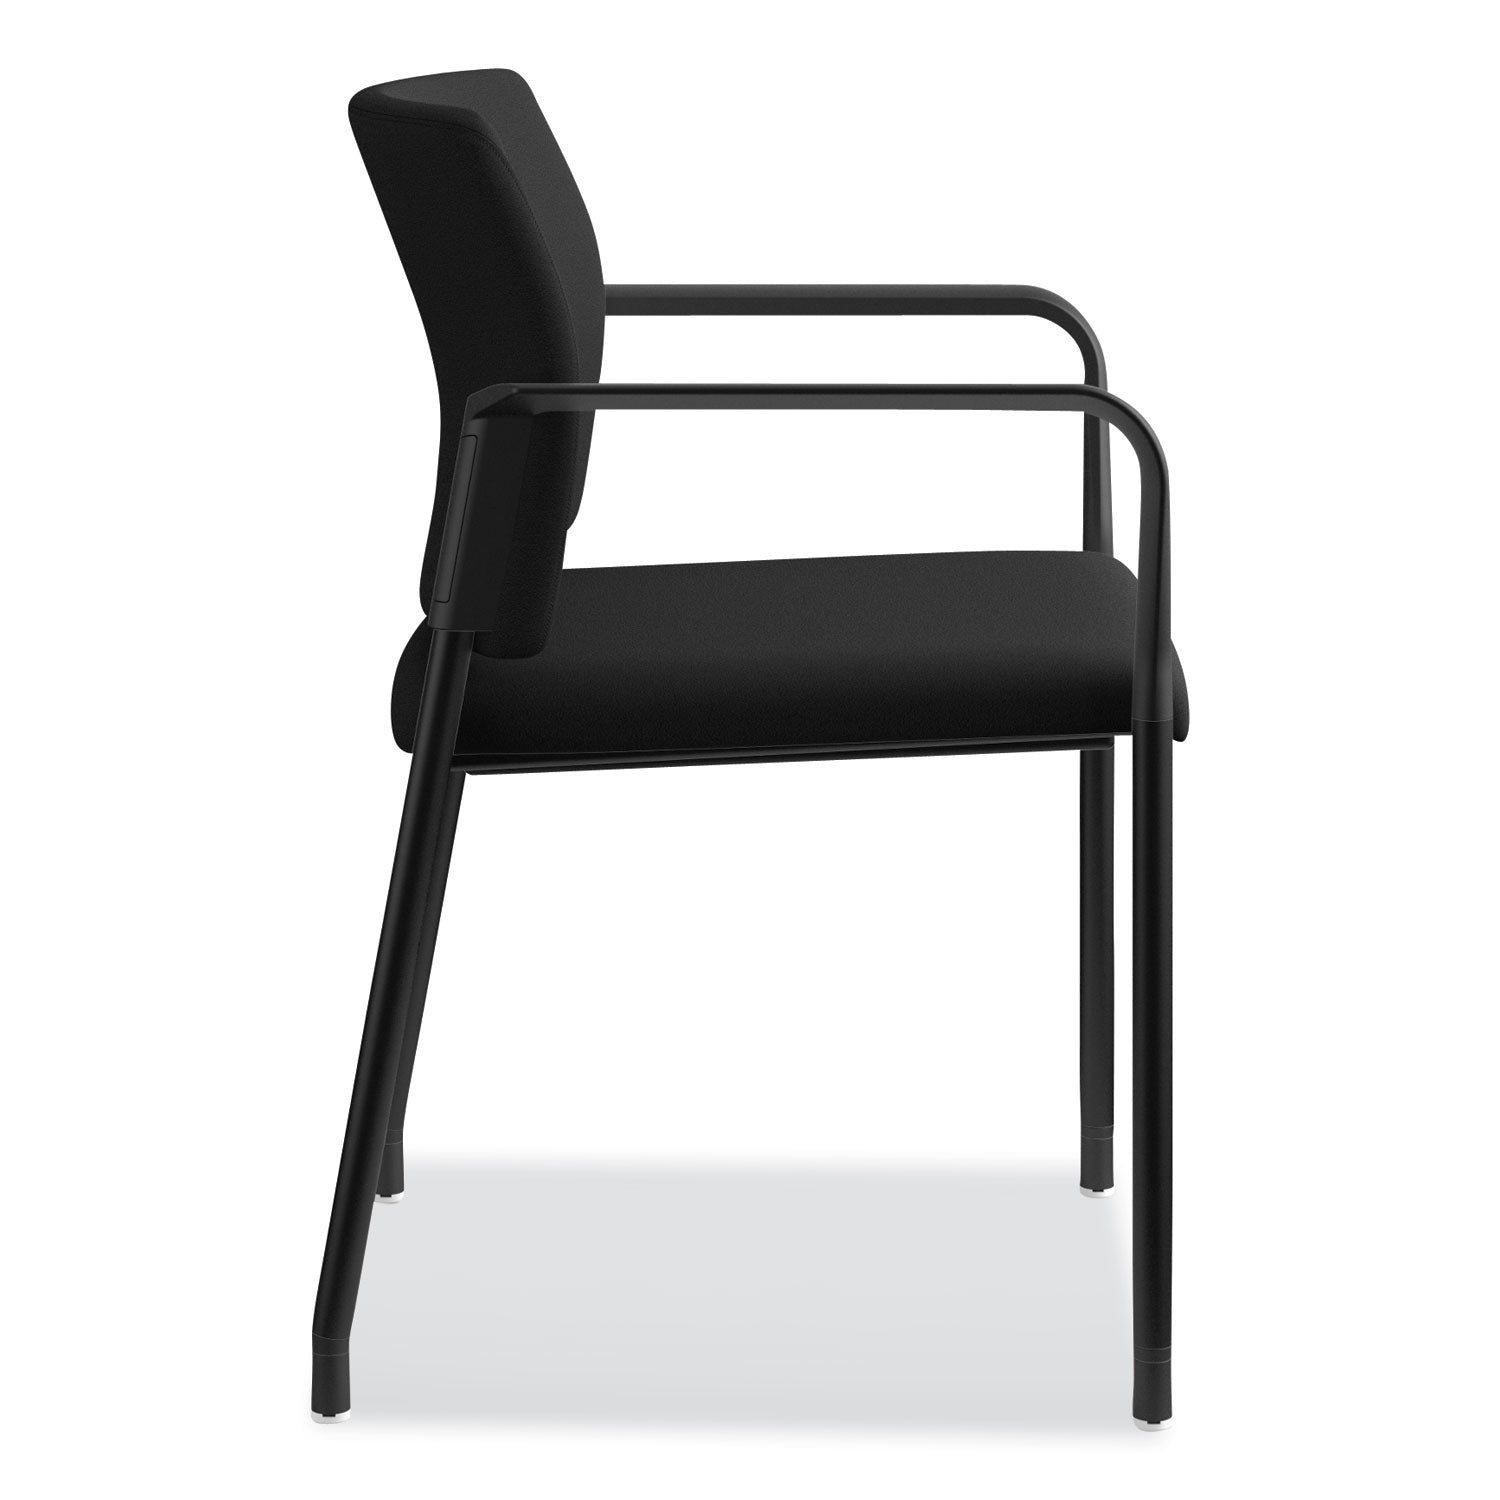 accommodate-series-guest-chair-with-arms-fabric-upholstery-2325-x-2225-x-32-black-seat-back-charblack-legs-2-carton_honsgs6fbc10c - 4